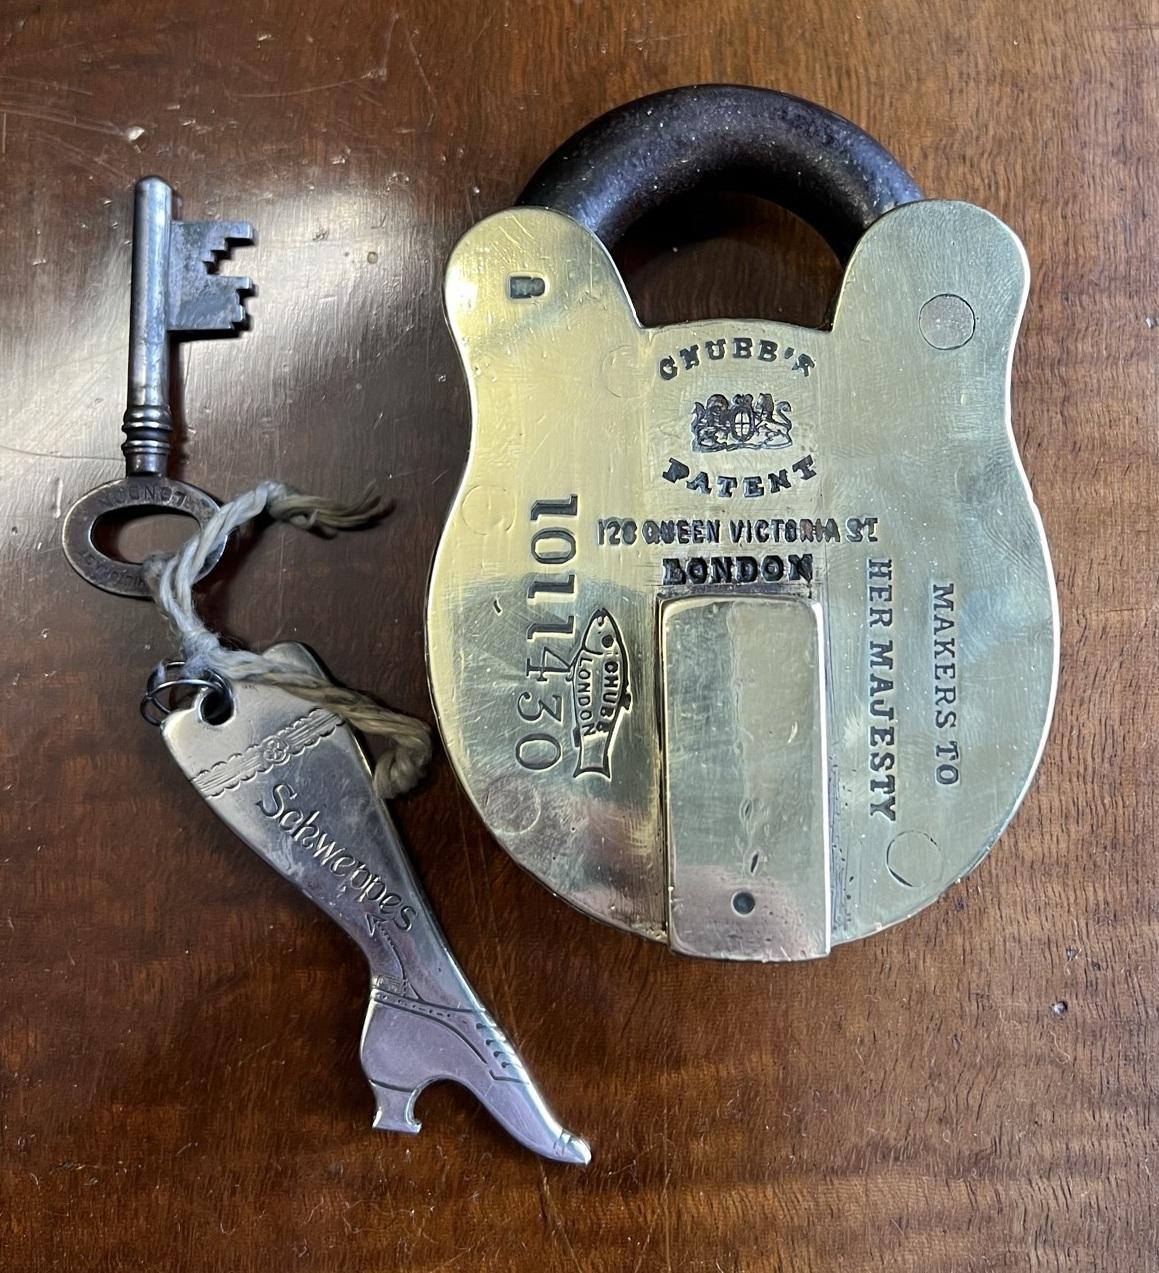 We are delighted to offer for sale this absolutely exquisite, finest example, fully hallmarked Chubb’s patent Victorian padlock with the original key

These locks come up for sale occasionally, they never have the key so are for pure decorative